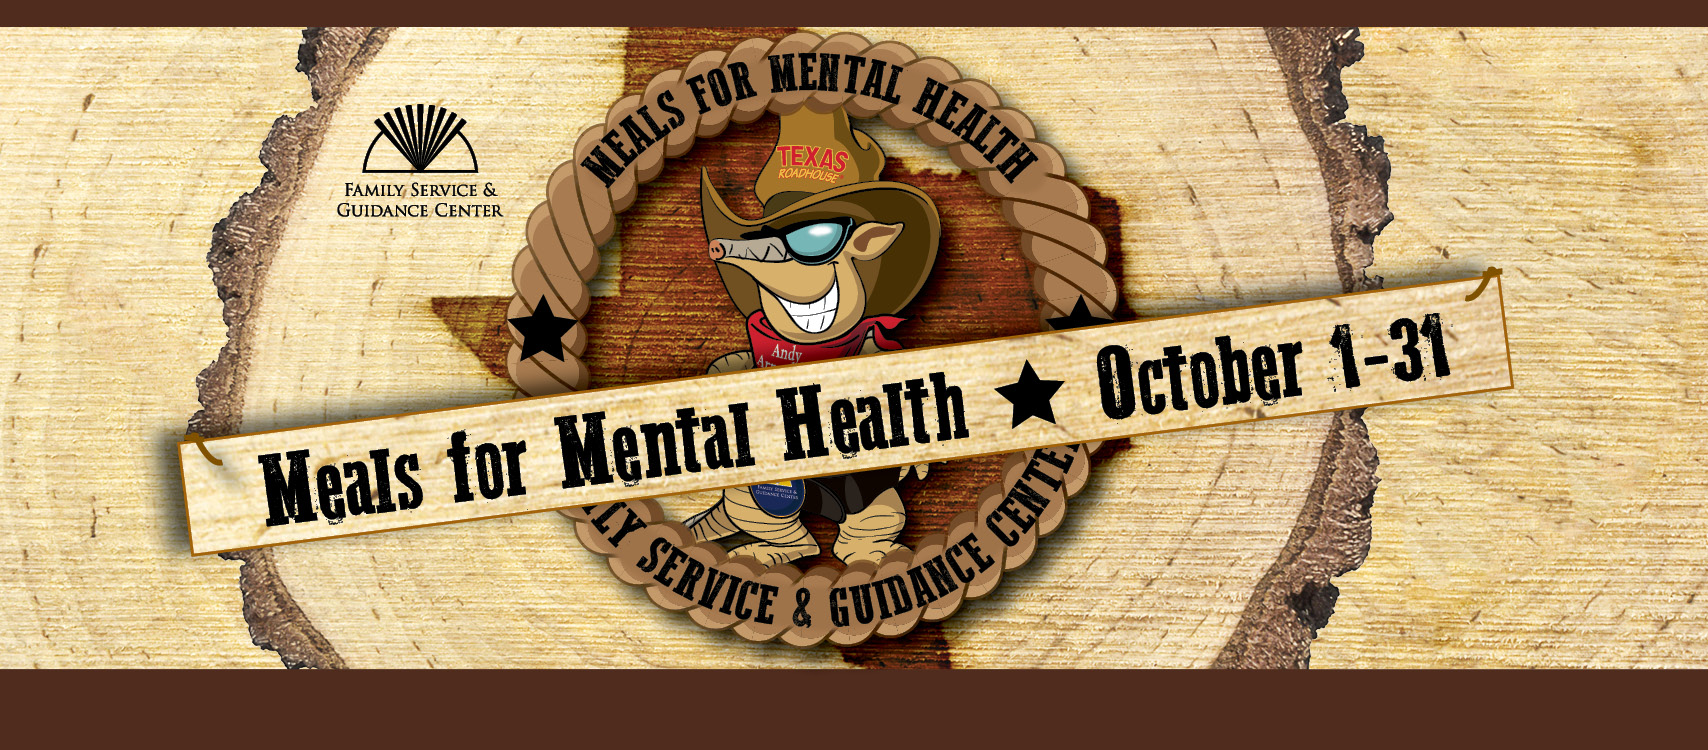 An advertising image for Meals for Mental Health. An Armadillo wearing a cowboy outfit is in the center. The background is a wooden pattern. The image has the Family Service and Guidance Center logo. The text reads Meals for Mental Health, Family Service and Guidance Center. Meals for Mental Health, October First through thirty-first.